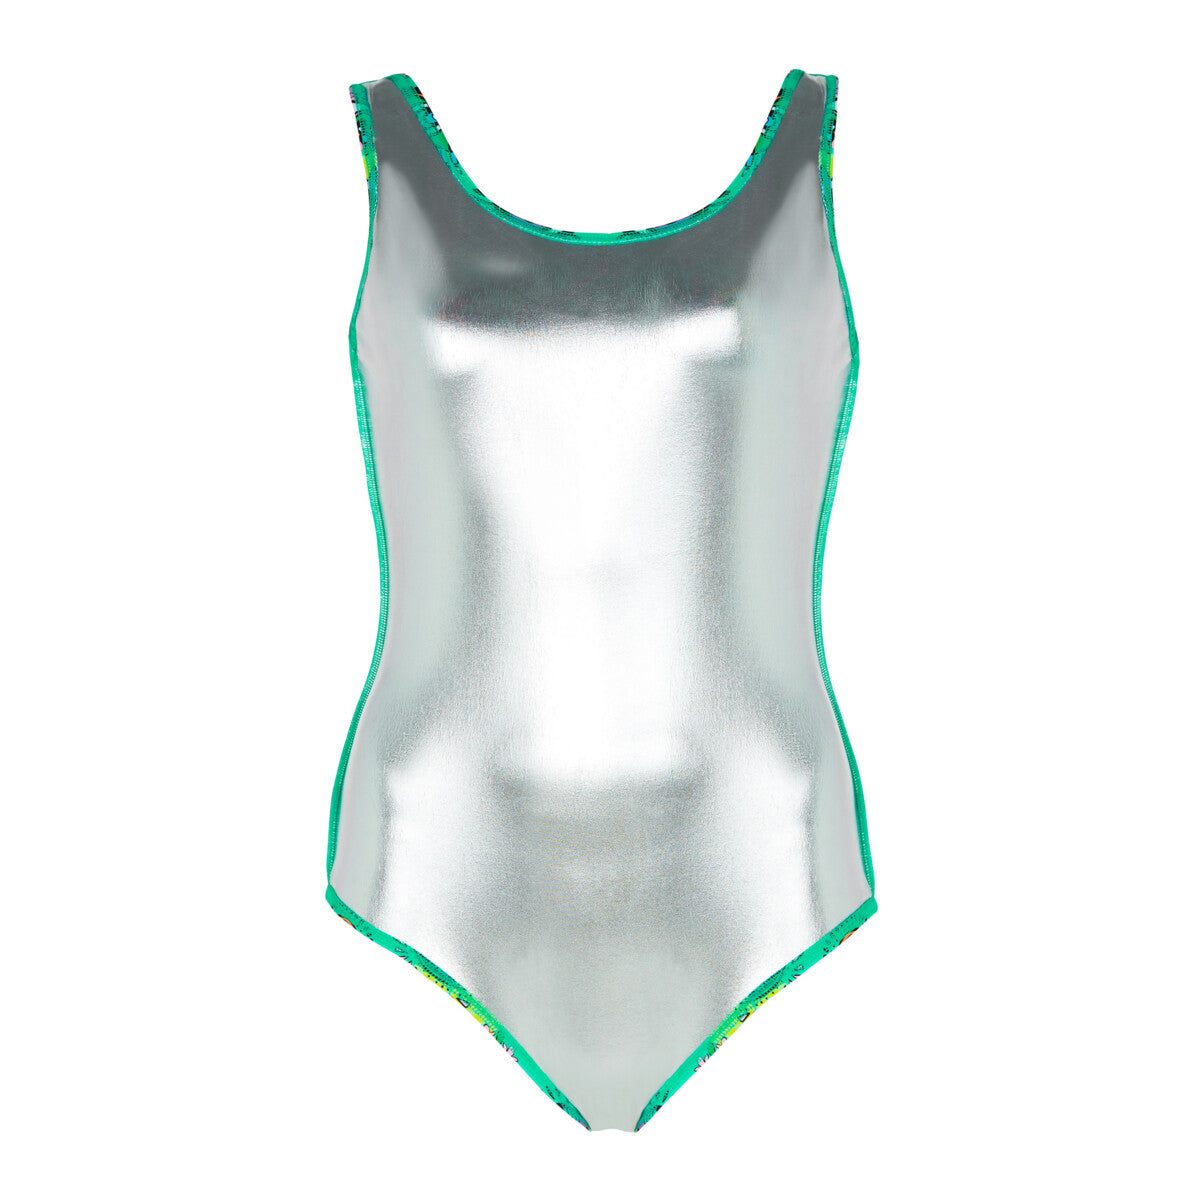 LOOK INSIDE SILVER LINED SCOOPBACK SWIMSUIT